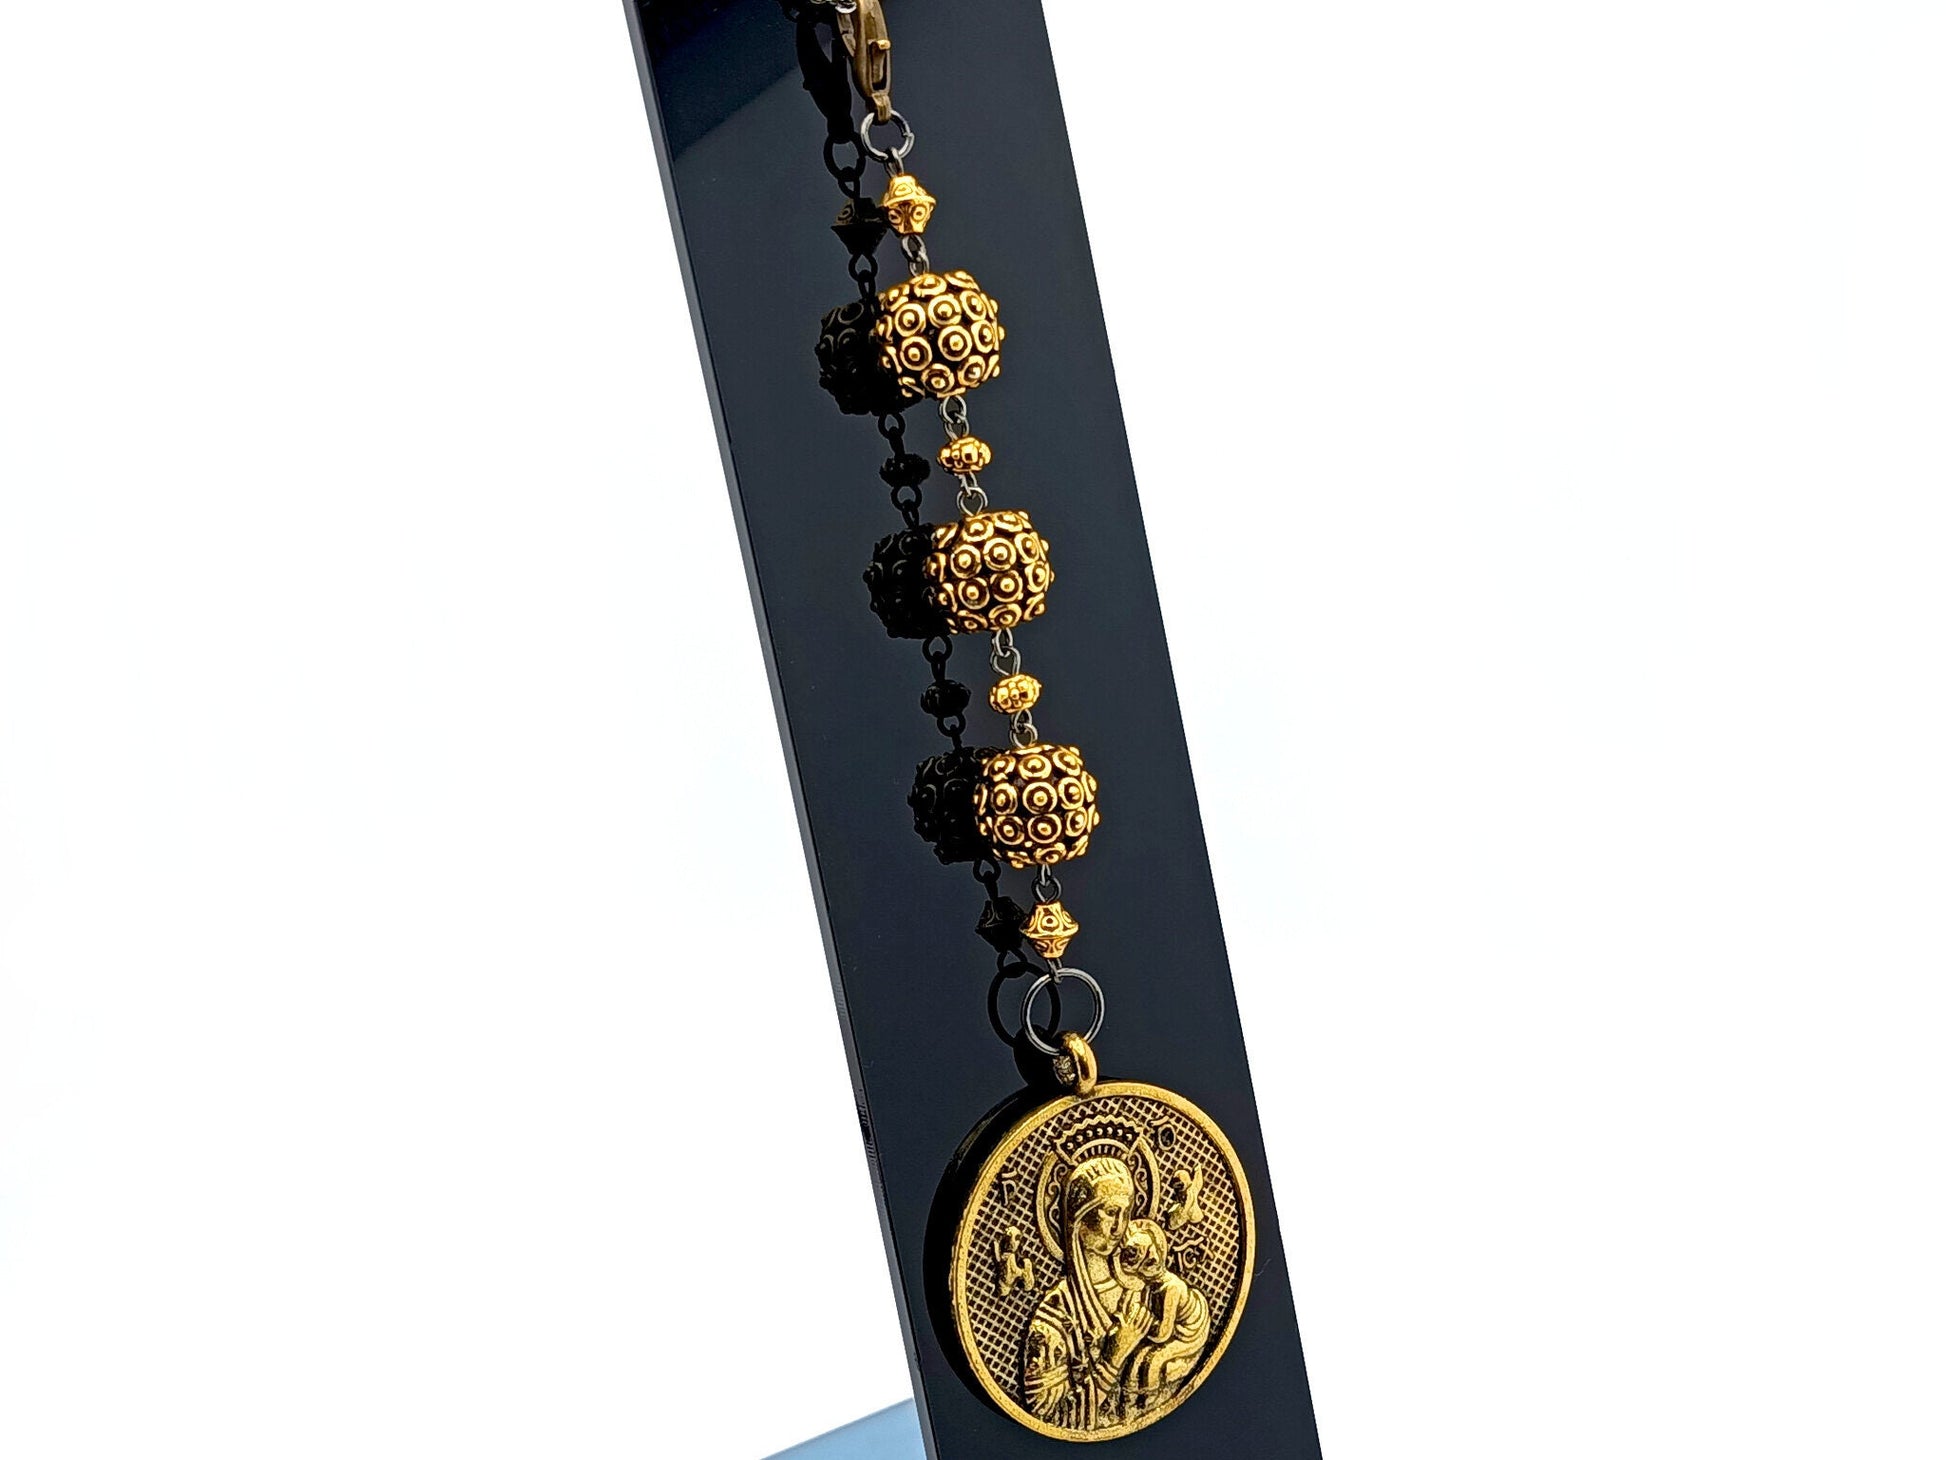 Our Lady of Succor unique rosary beads three Hail Marys purse clip with golden beads, medal and clip.